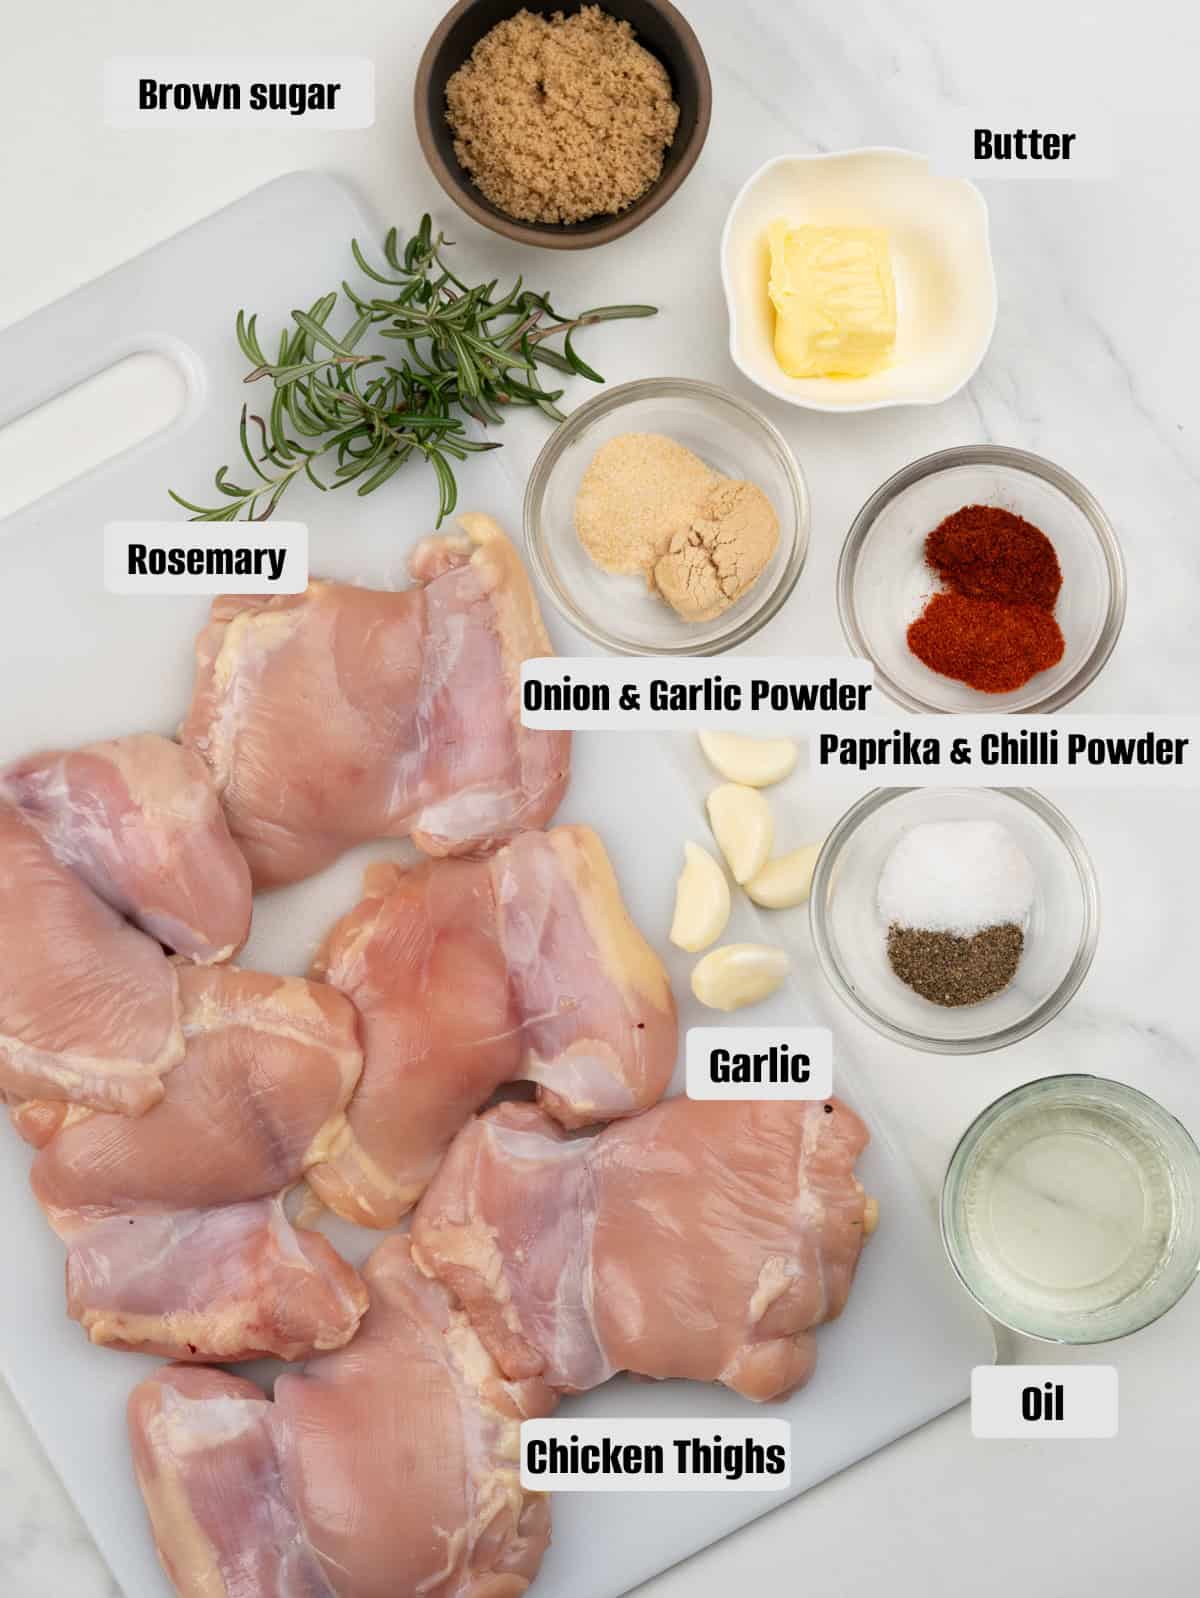 Ingredients for sweet and spicy chicken thighs.